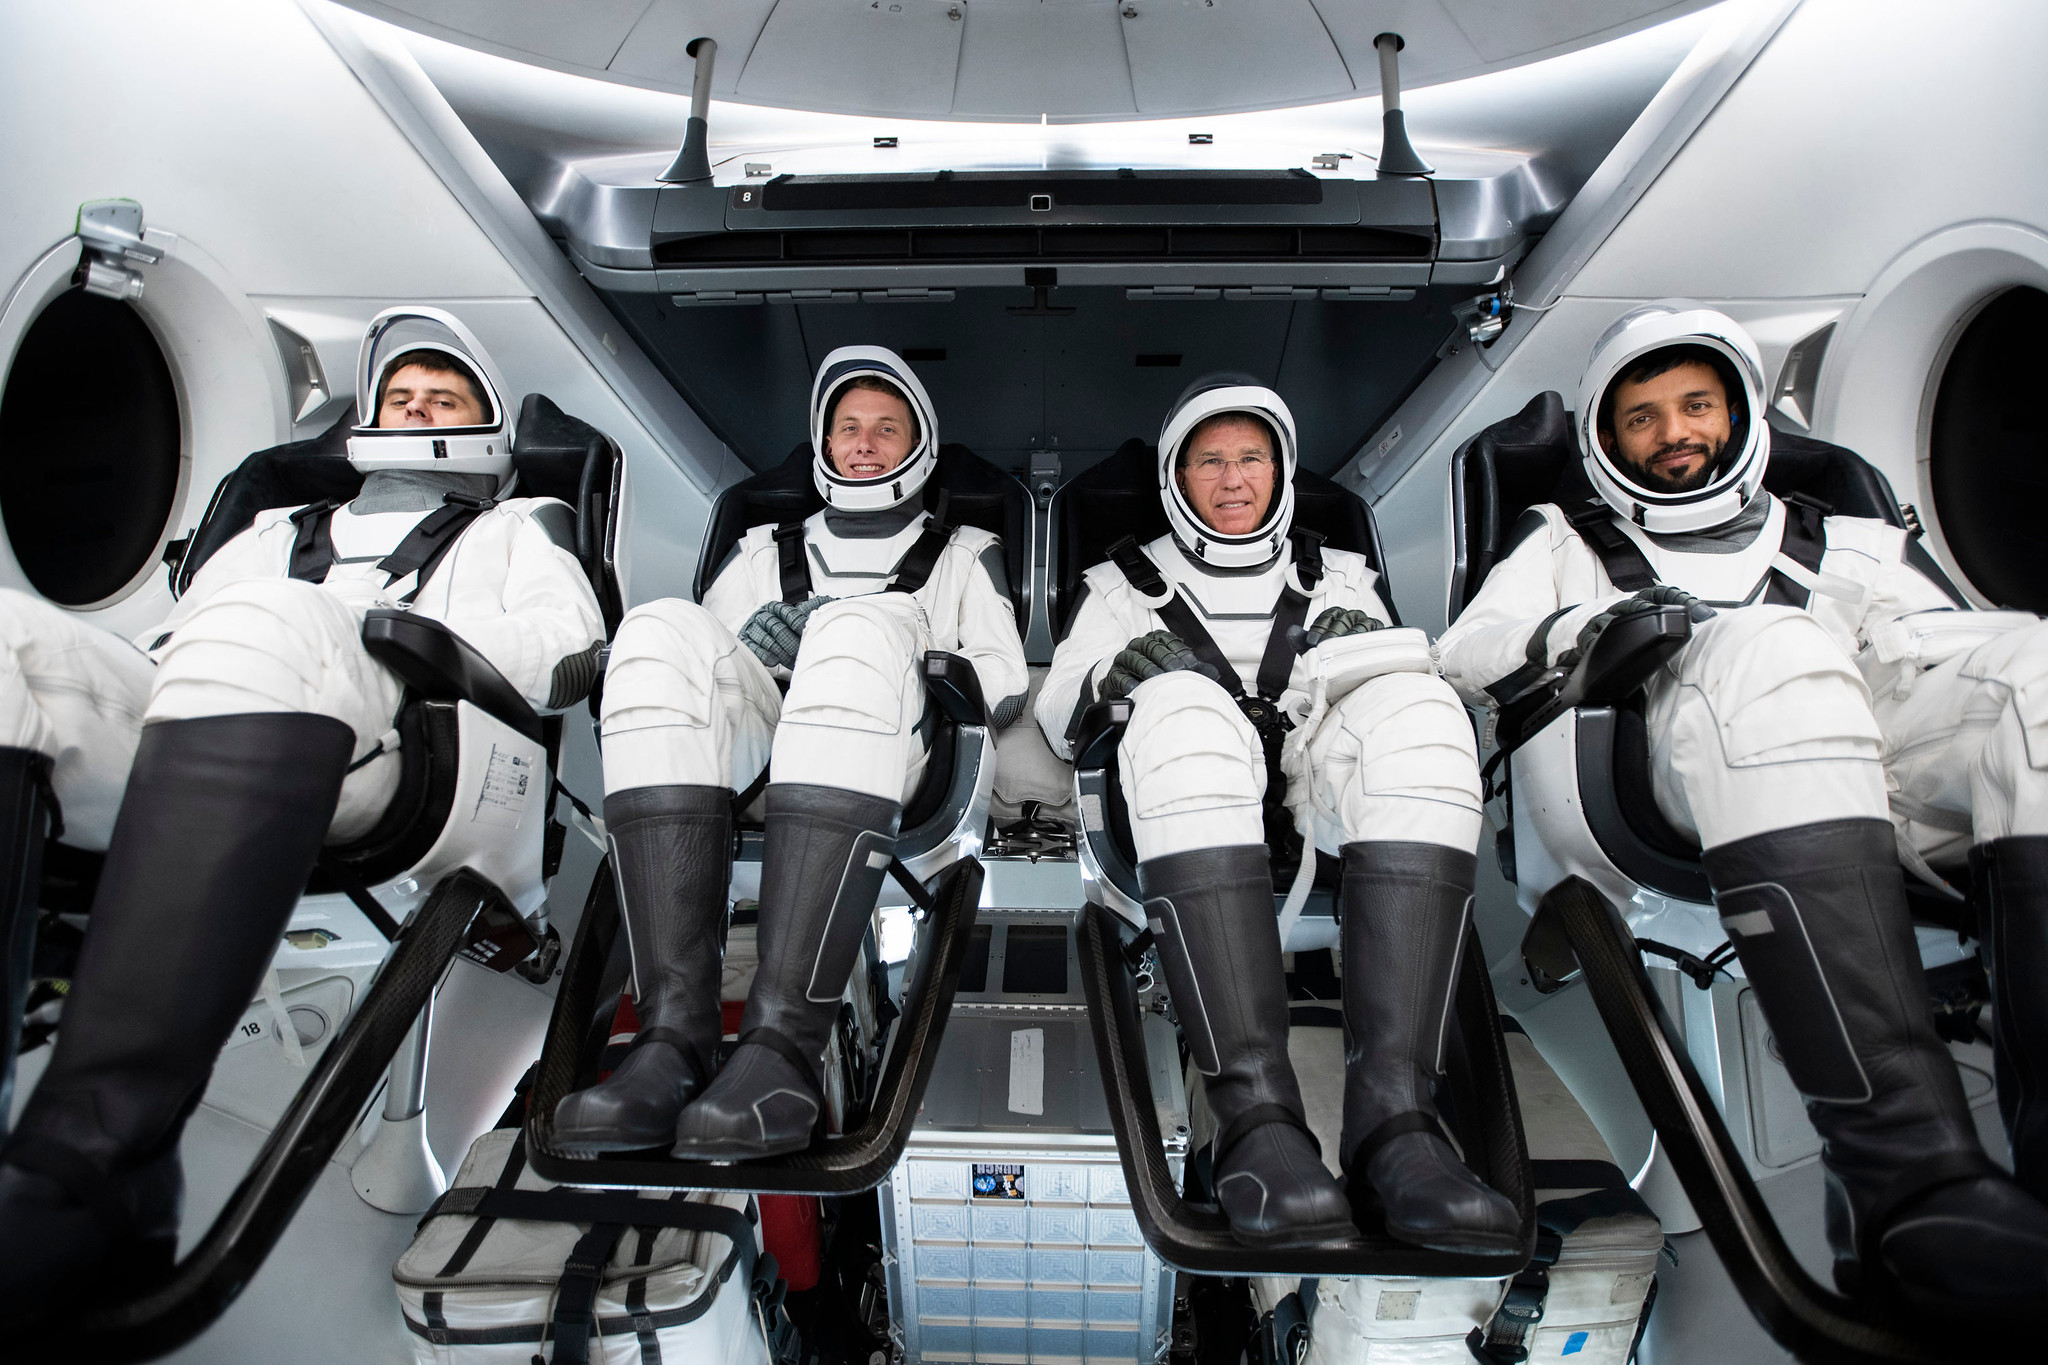 Seated from left in their spacesuits are, Mission Specialist Andrey Fedyaev, Pilot Warren u0022Woodyu0022 Hoburg, Commander Stephen Bowen, and Mission Specialist Sultan Alneyadi.